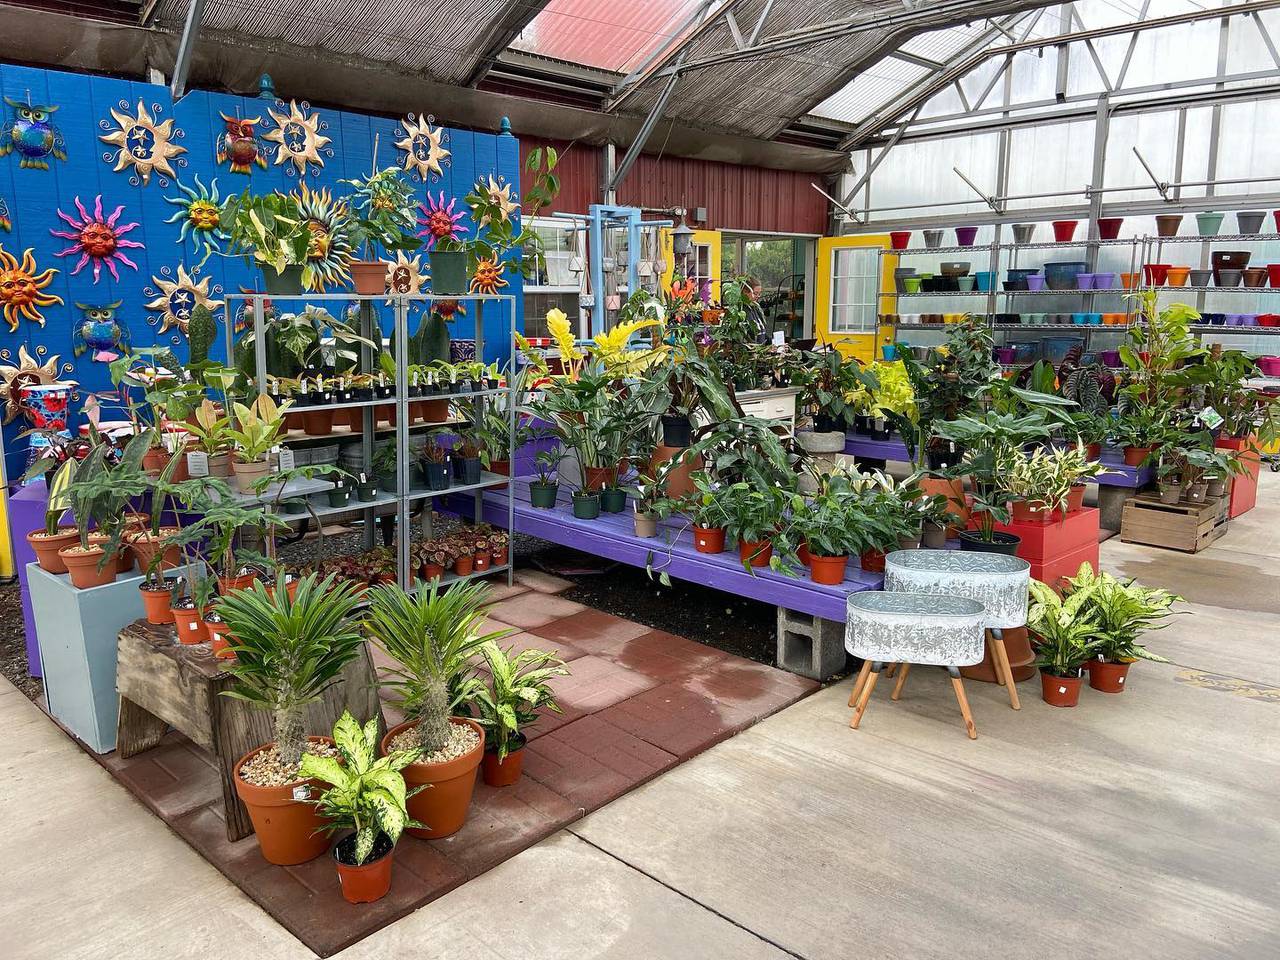 Discover our Upstairs! Houseplants, Homestead supplies, Gifts and More! -  Eastside Urban Farm and Garden Discover our Upstairs! Houseplants,  Homestead Supplies, Gifts and More